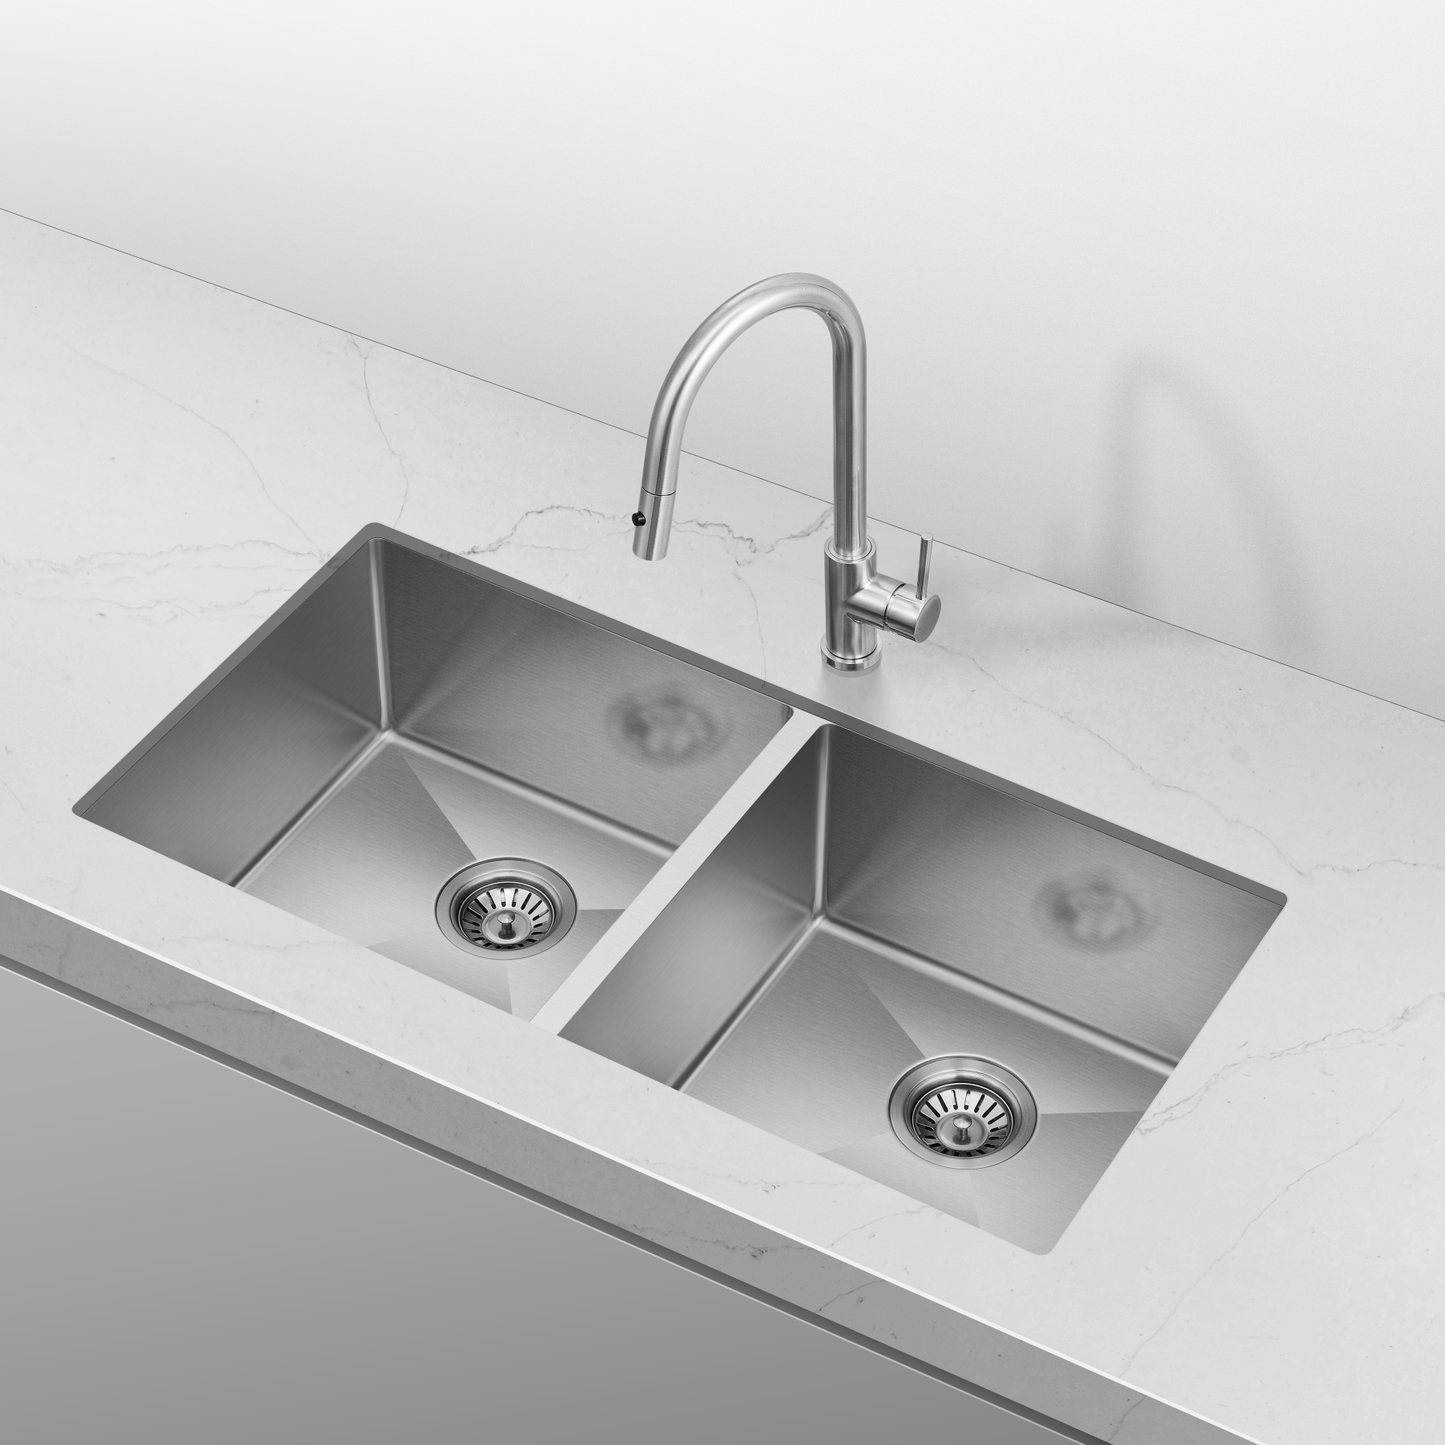 Retto 875mm x 450mm x 230mm Large Stainless Steel Double Sink | Brushed Nickel |